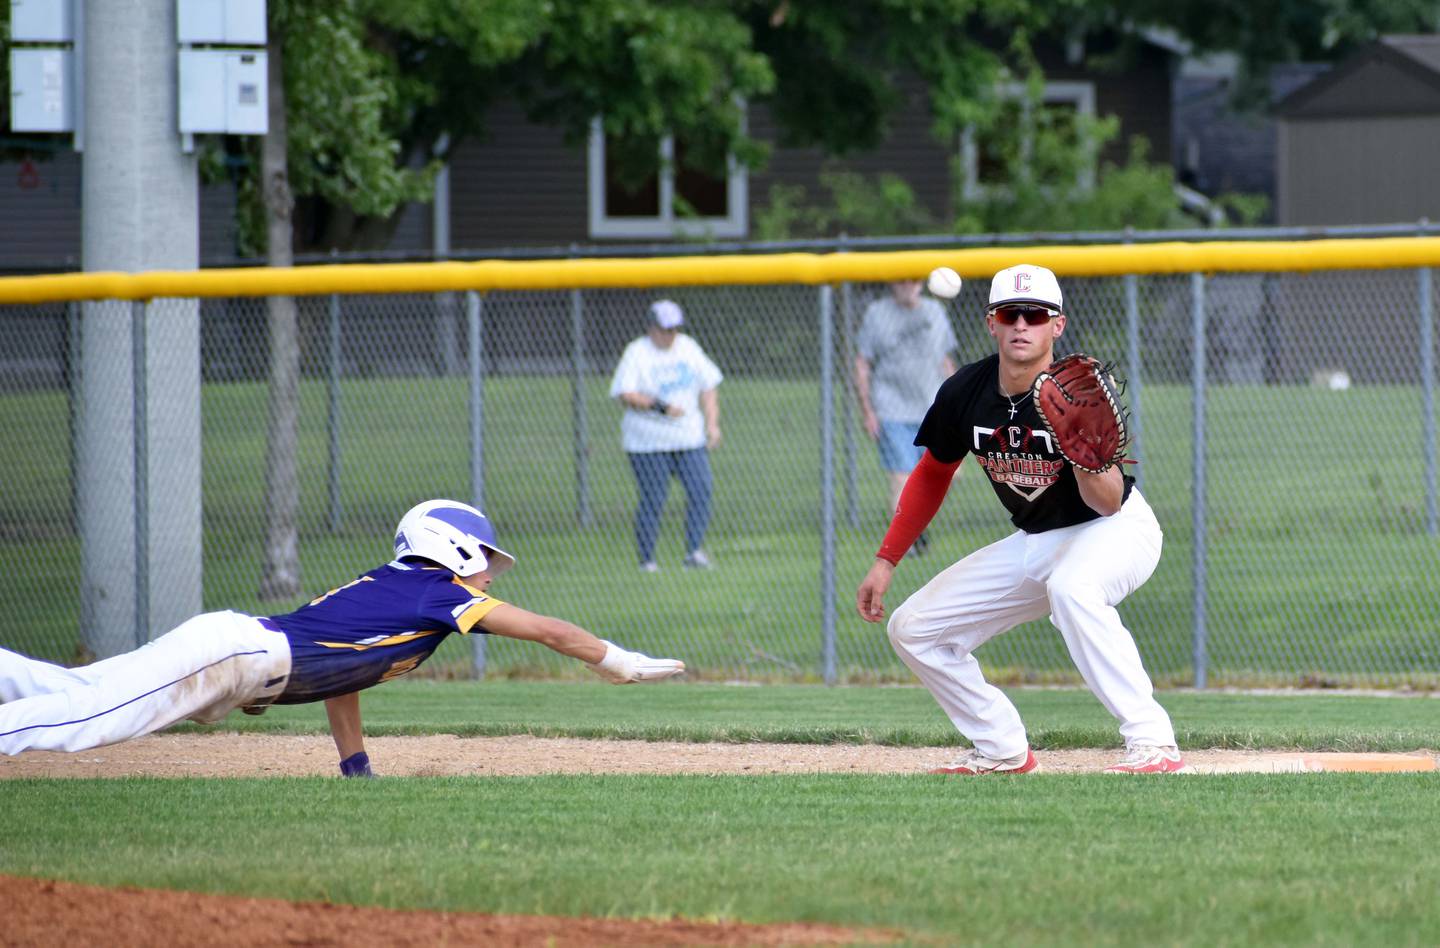 Senior first baseman Sam Henry gets a ball from the pitcher trying to pick off a runner leading off first.